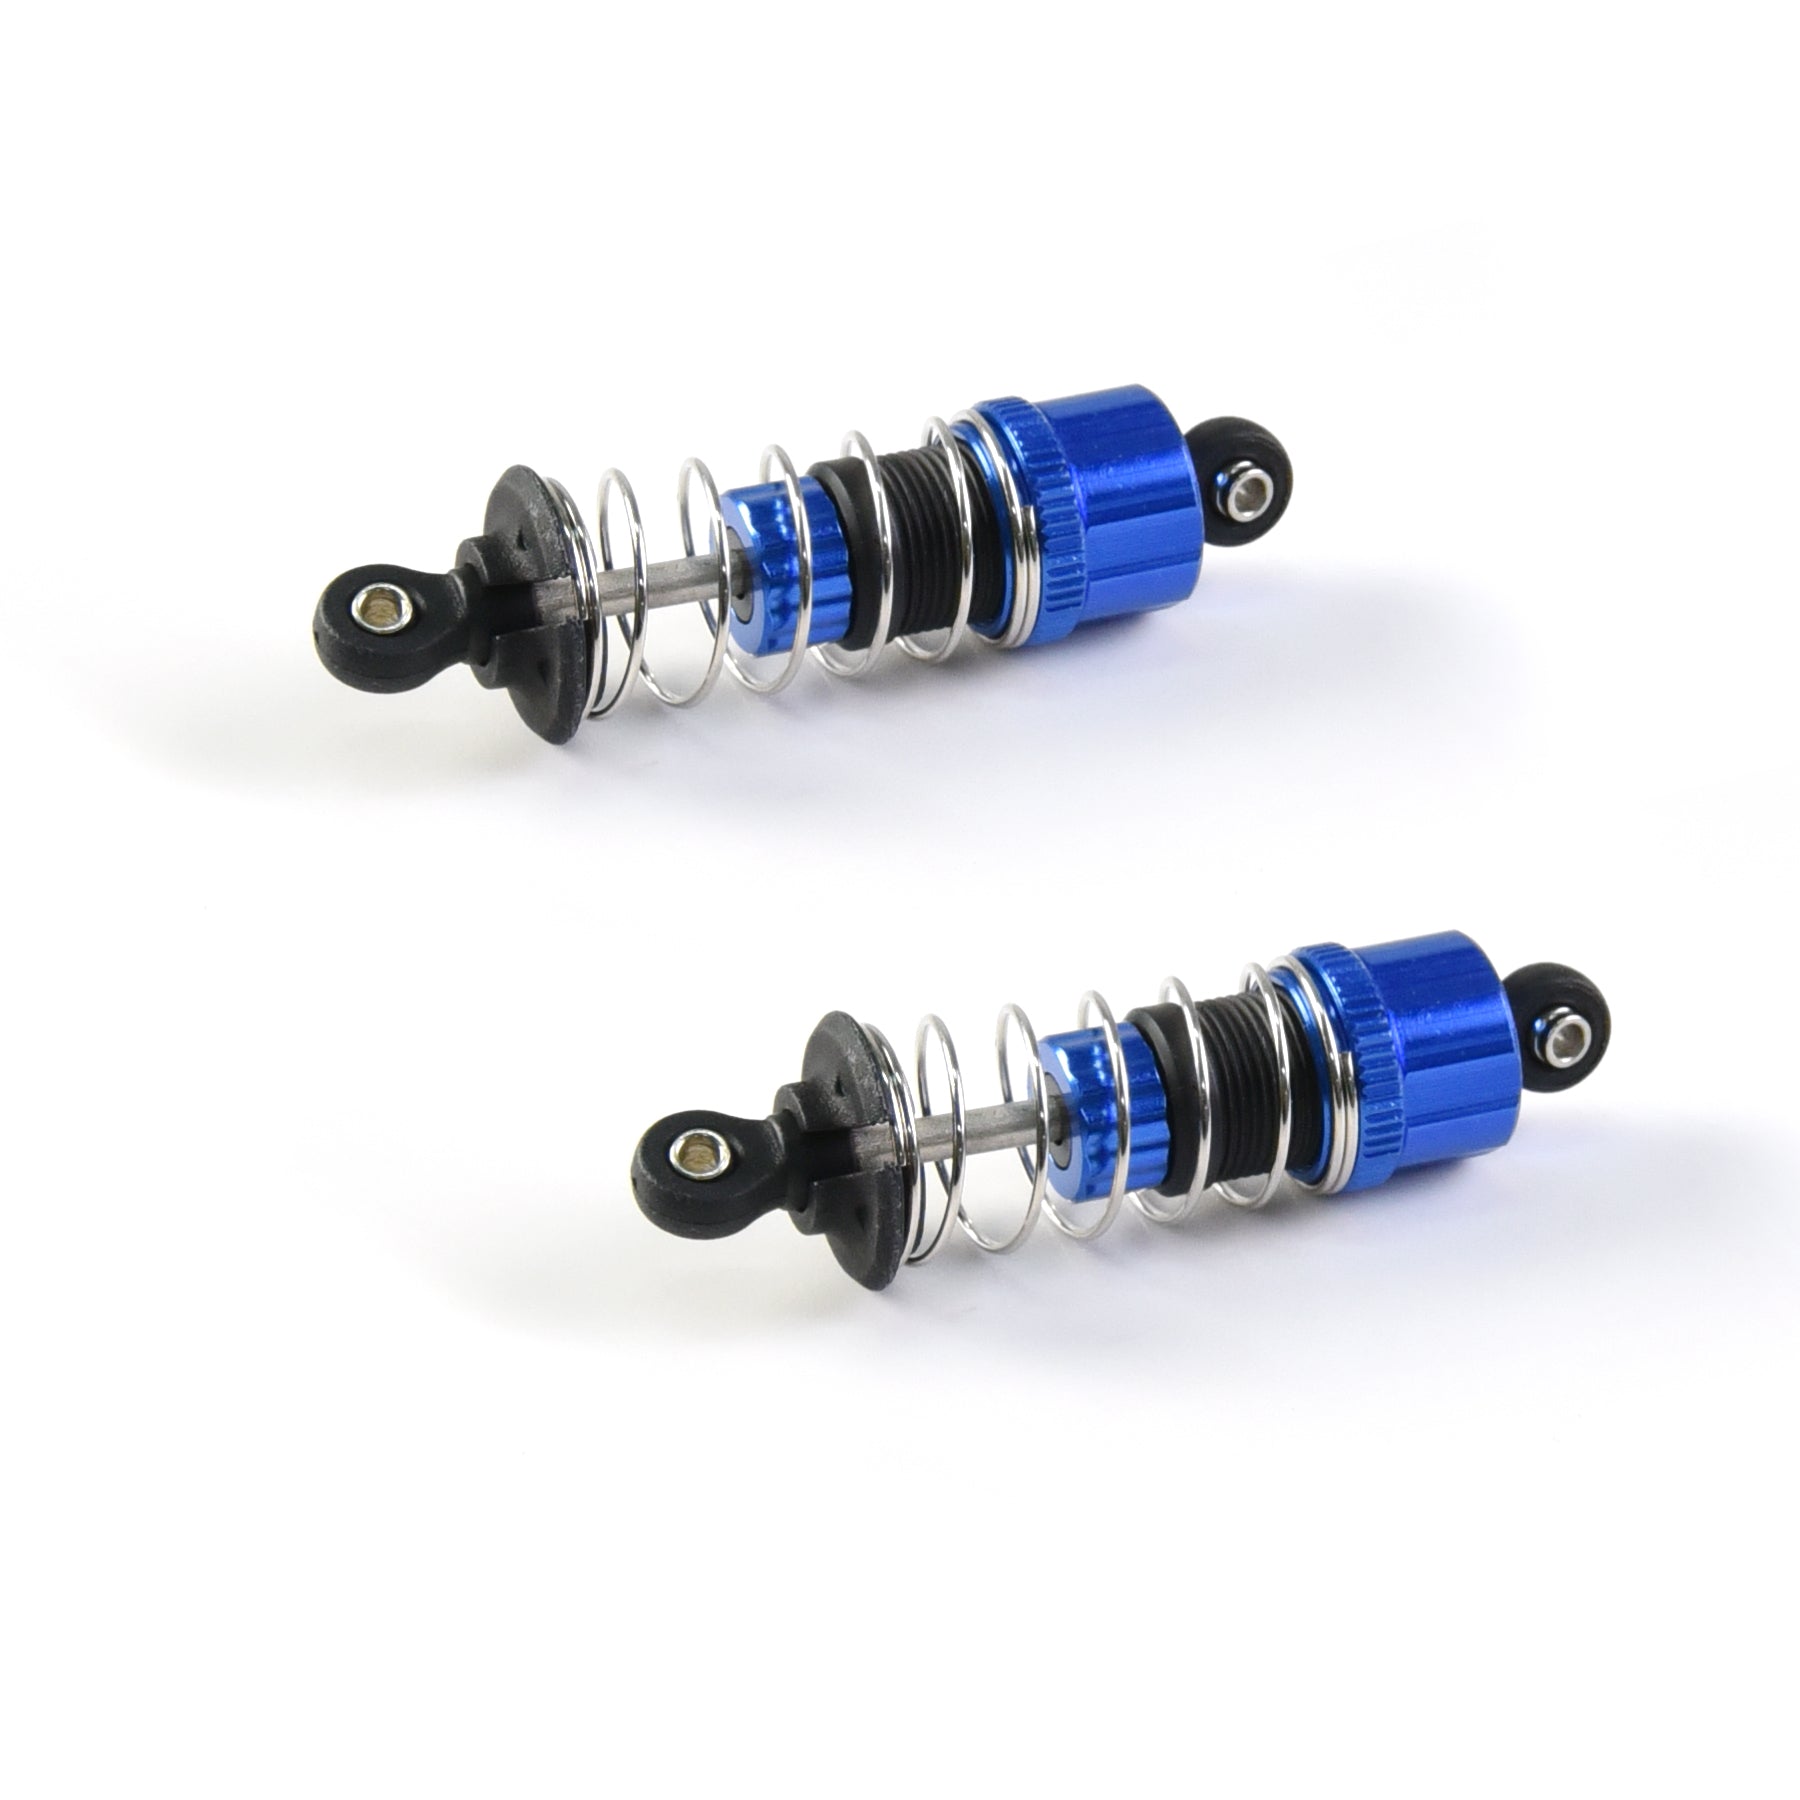 HOSIM RC Car Shock Absorbers 1:16 Scale 16500E for RC H07